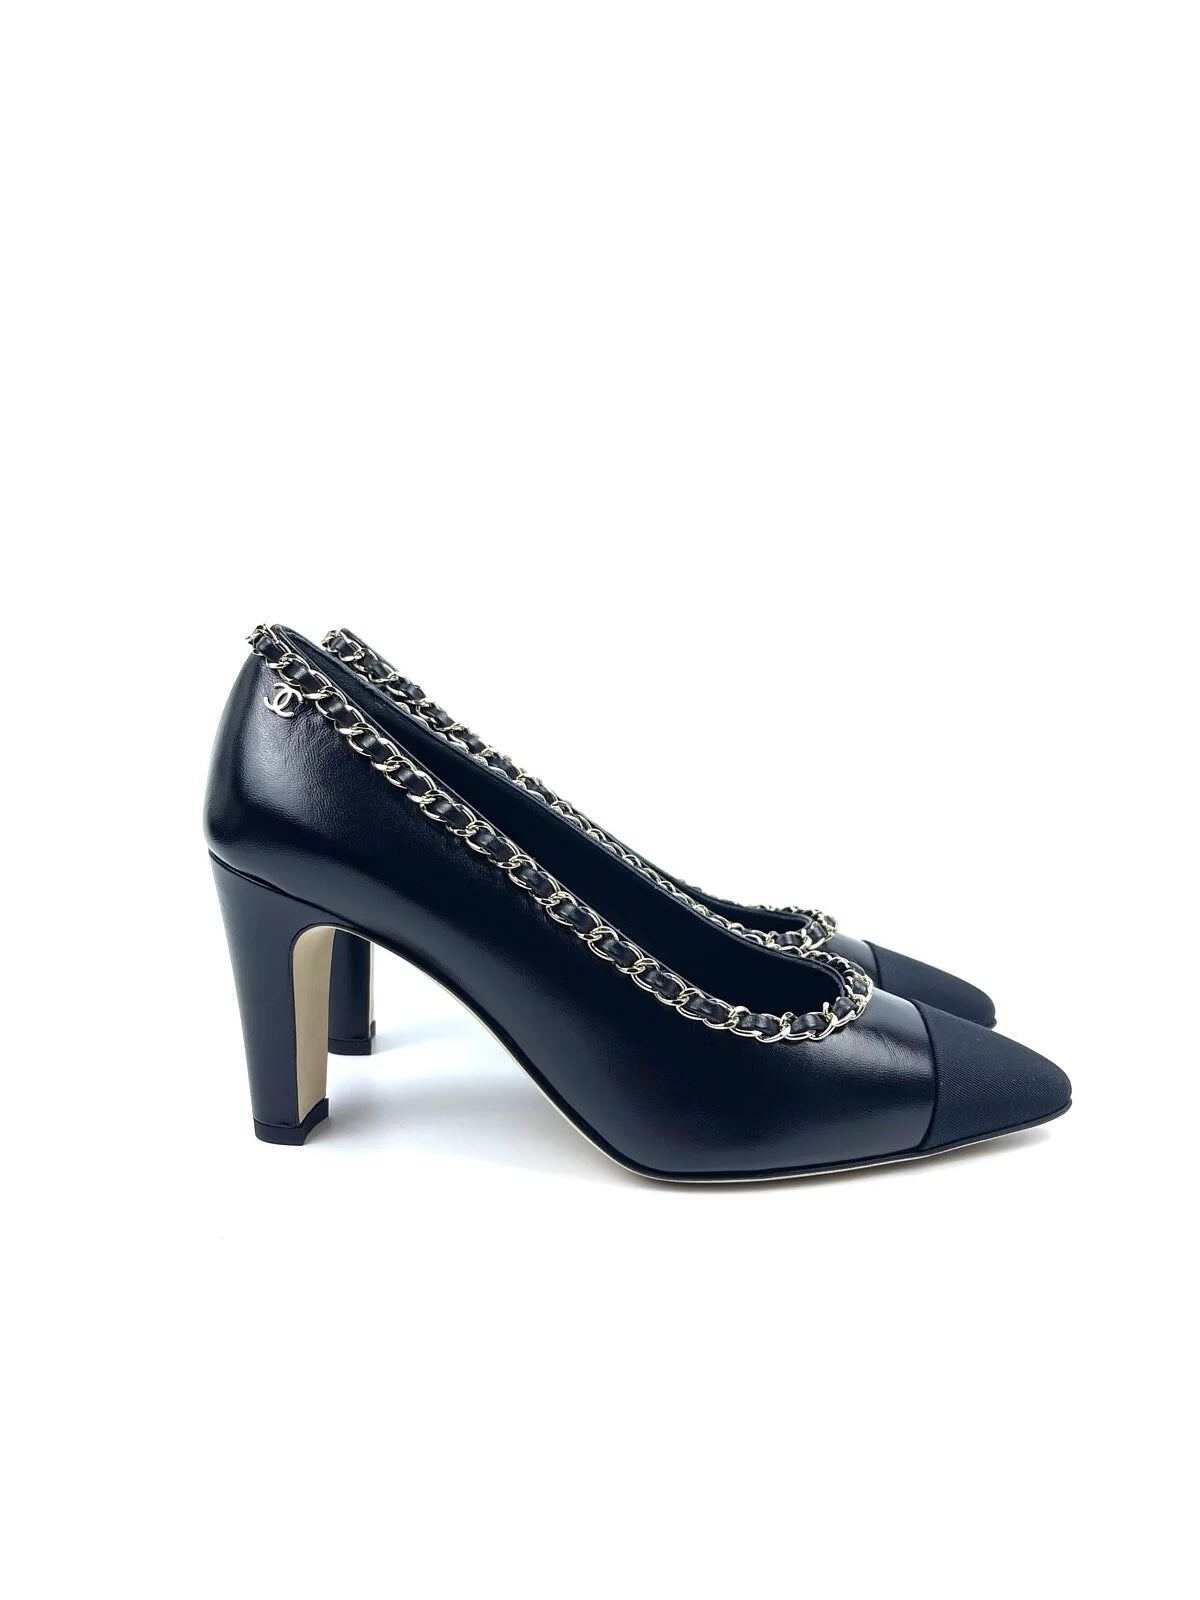 Hong Kong Stock - Chanel Black Lambskin Leather Woven Chain Braided Pumps (Size 36.5)